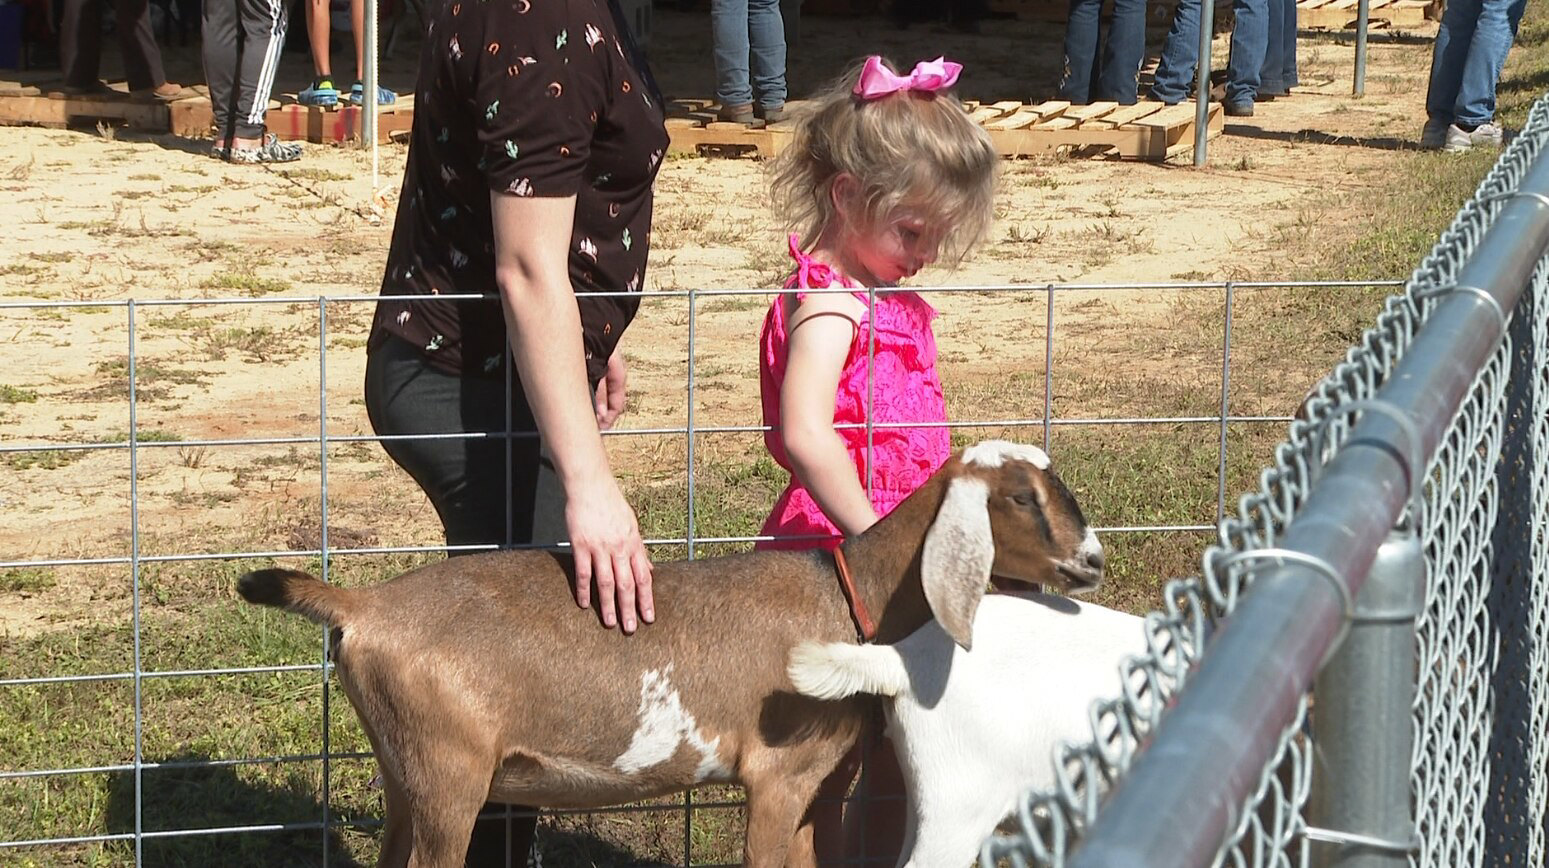 Annual Goat Day takes place in Blountstown